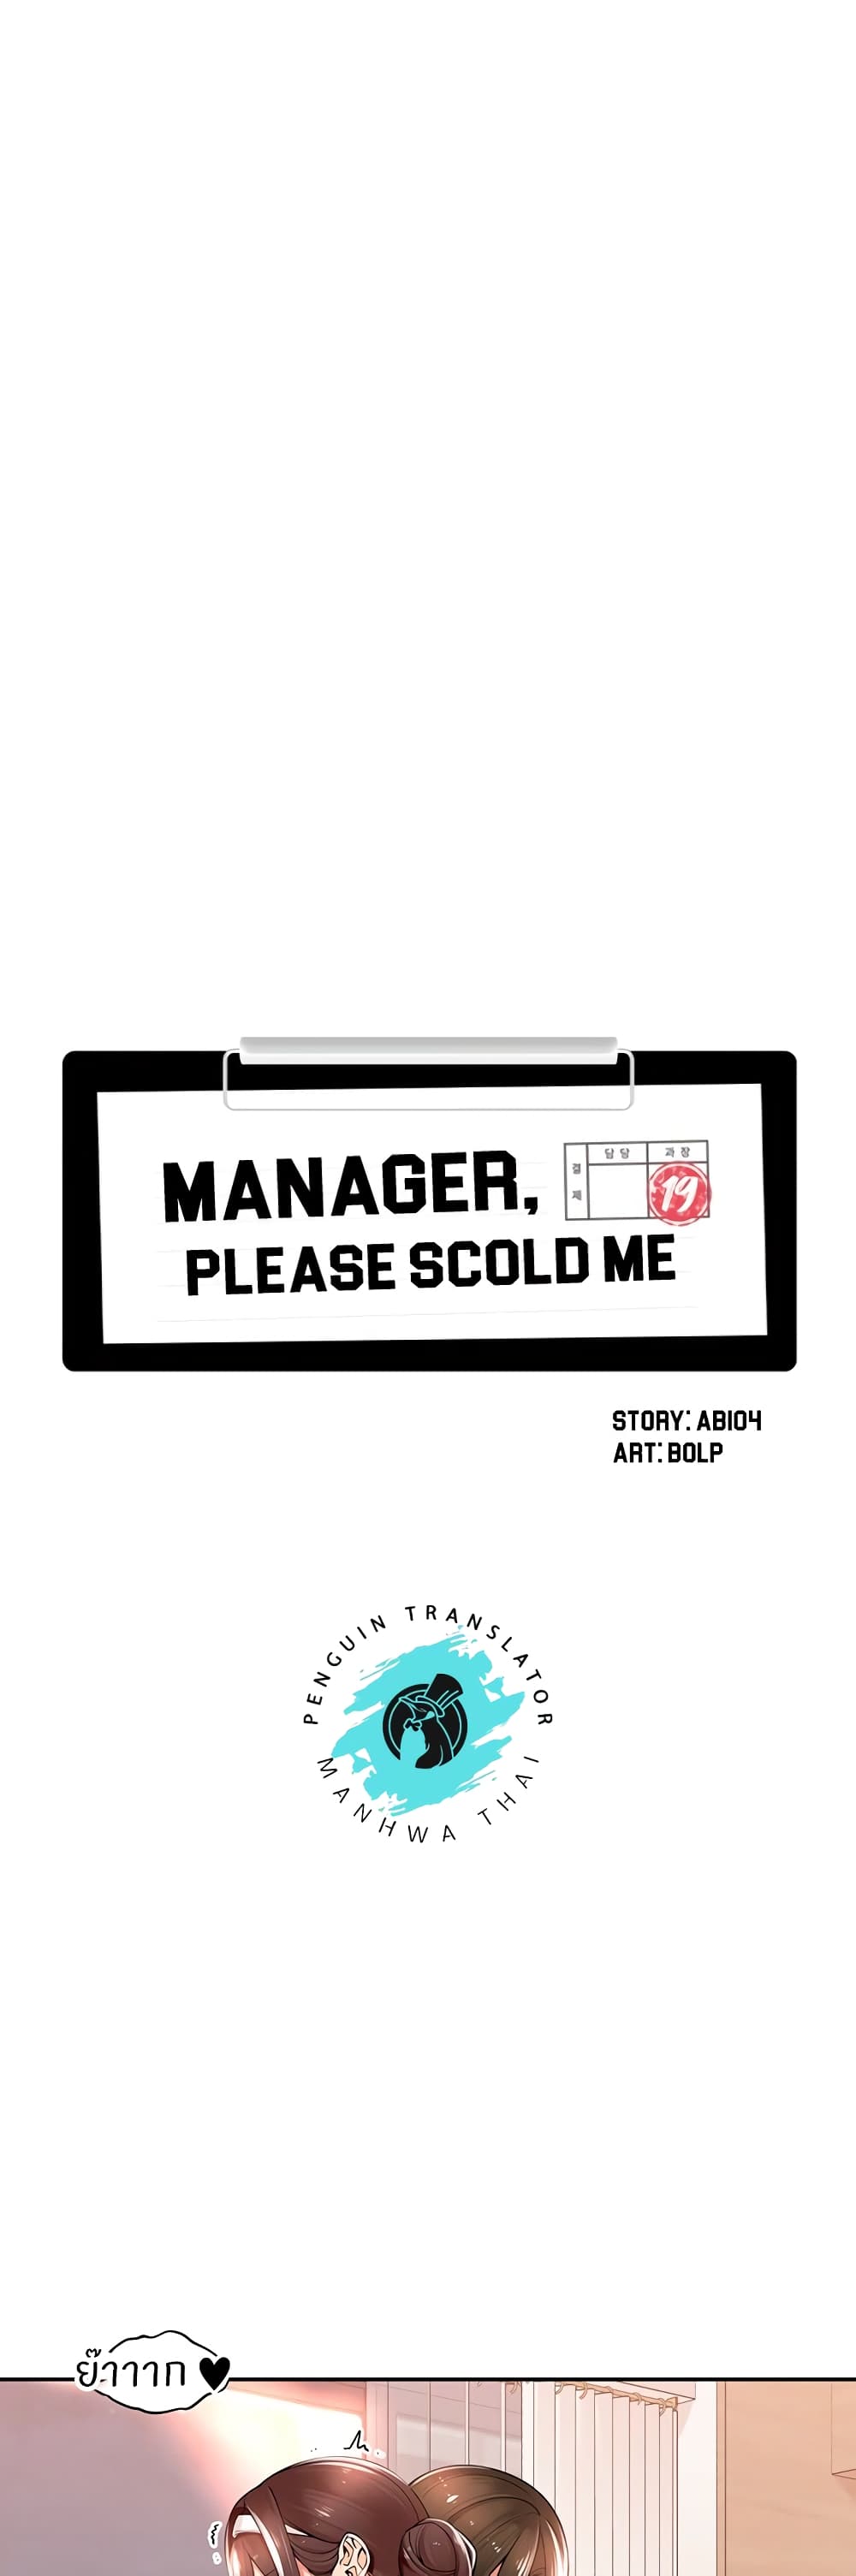 Manager, Please Scold Me 20-20